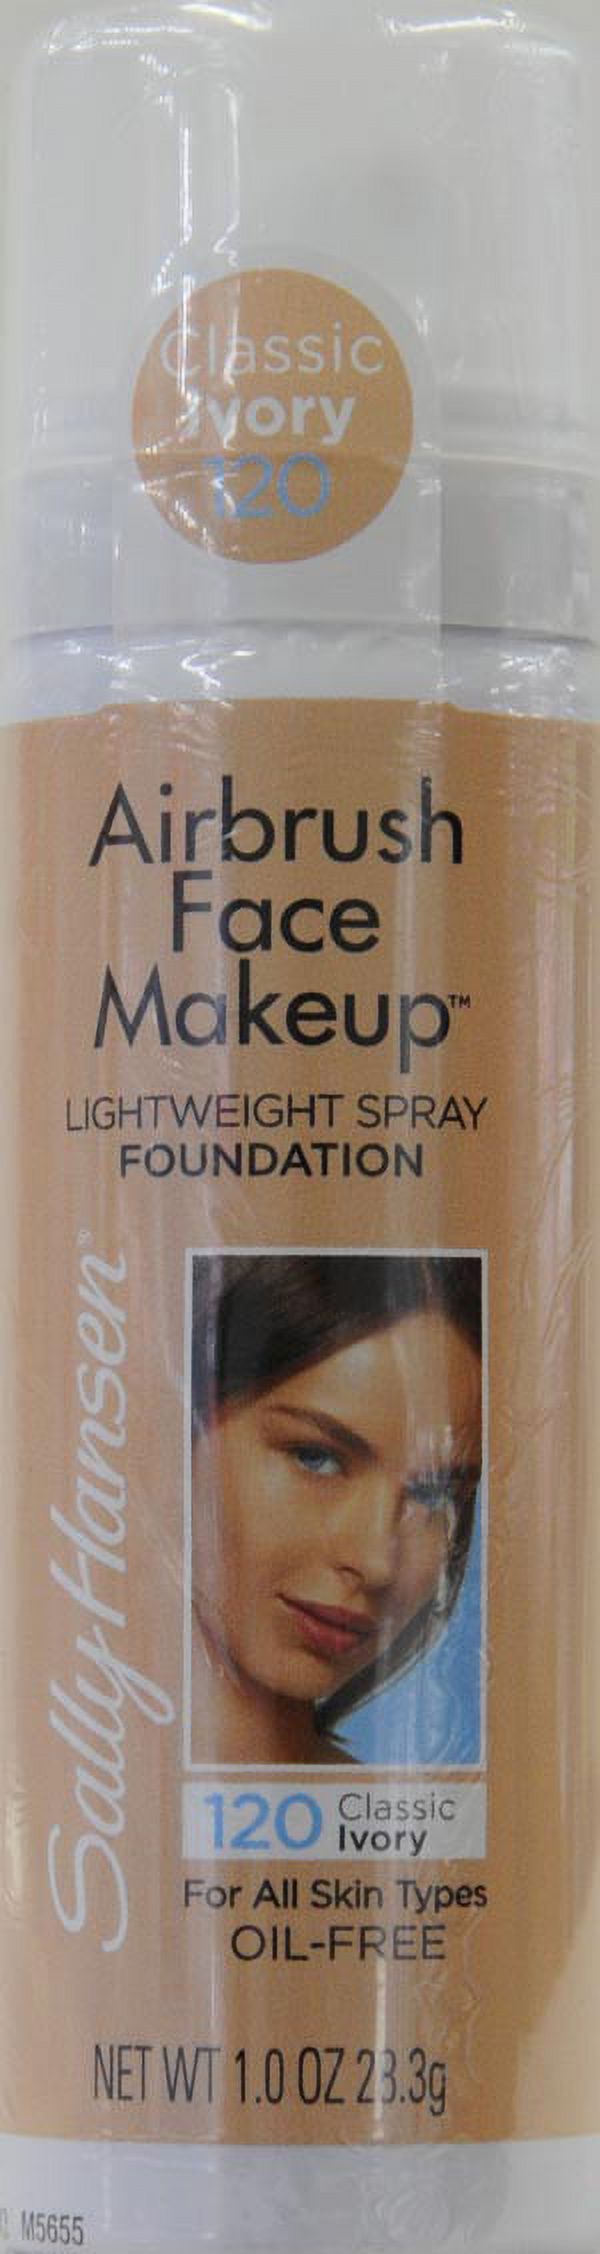 Sally Hansen Airbrush Face Makeup Foundation, Classic Ivory, 1 oz - image 3 of 3